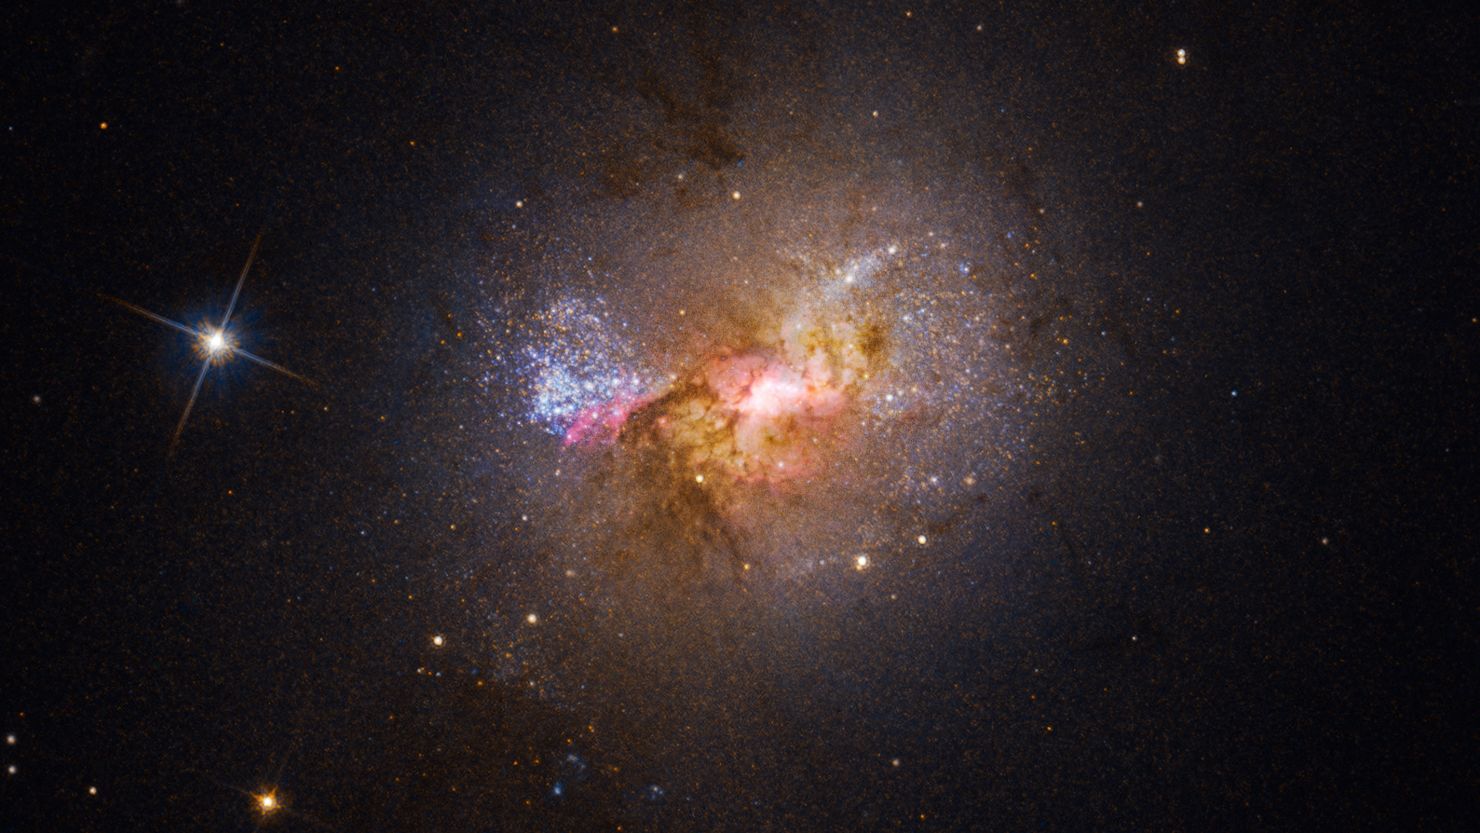 This Hubble Space Telescope image shows the dwarf galaxy Henize 2-10, which is filled with young stars. The bright center, surrounded by pink clouds, indicates the location of its black hole and areas of star birth.